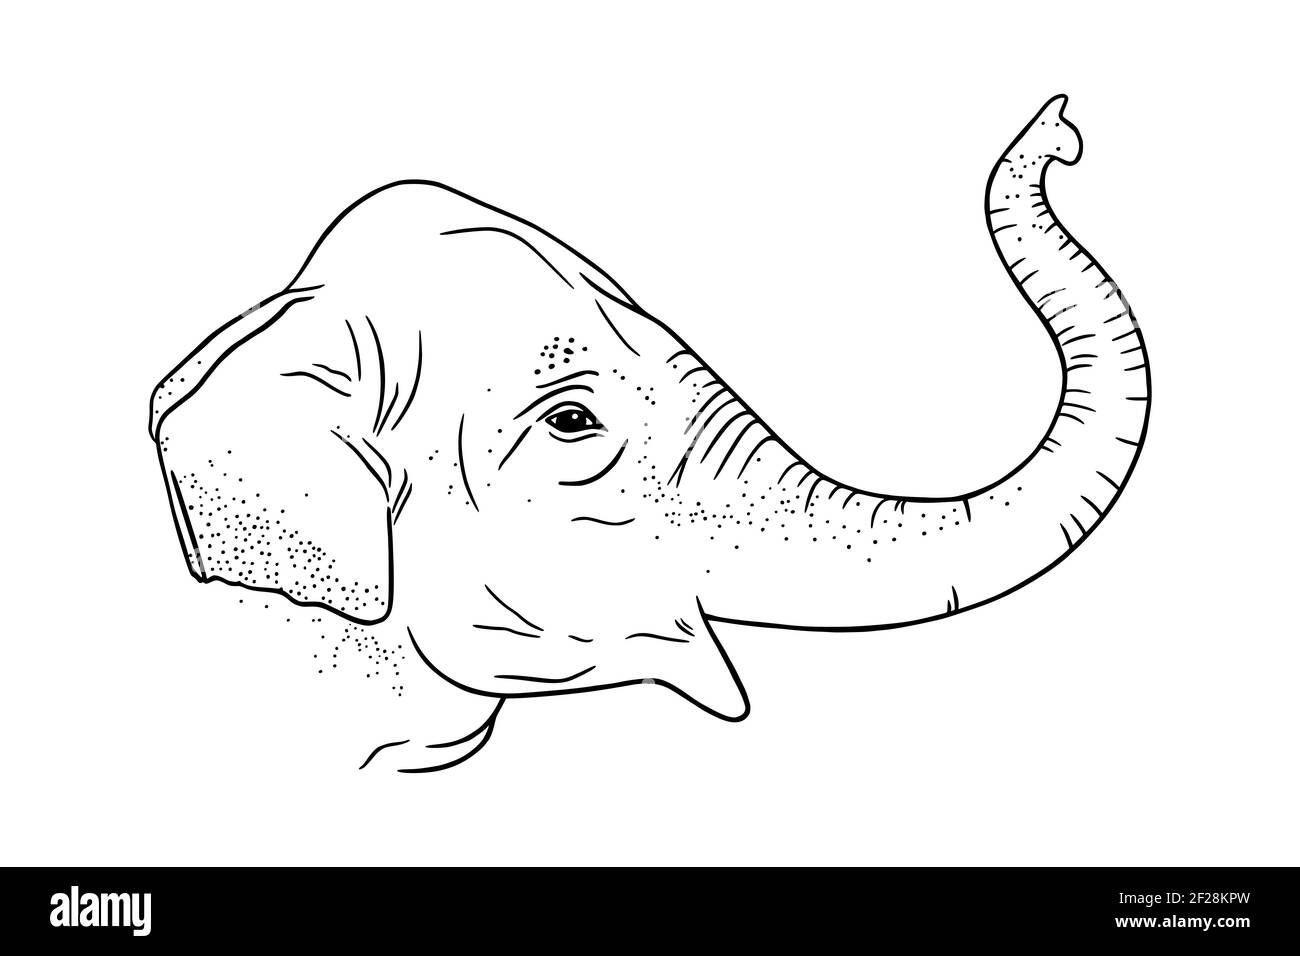 Easy Elephant Drawing Step by Step Printable  Crafty Morning